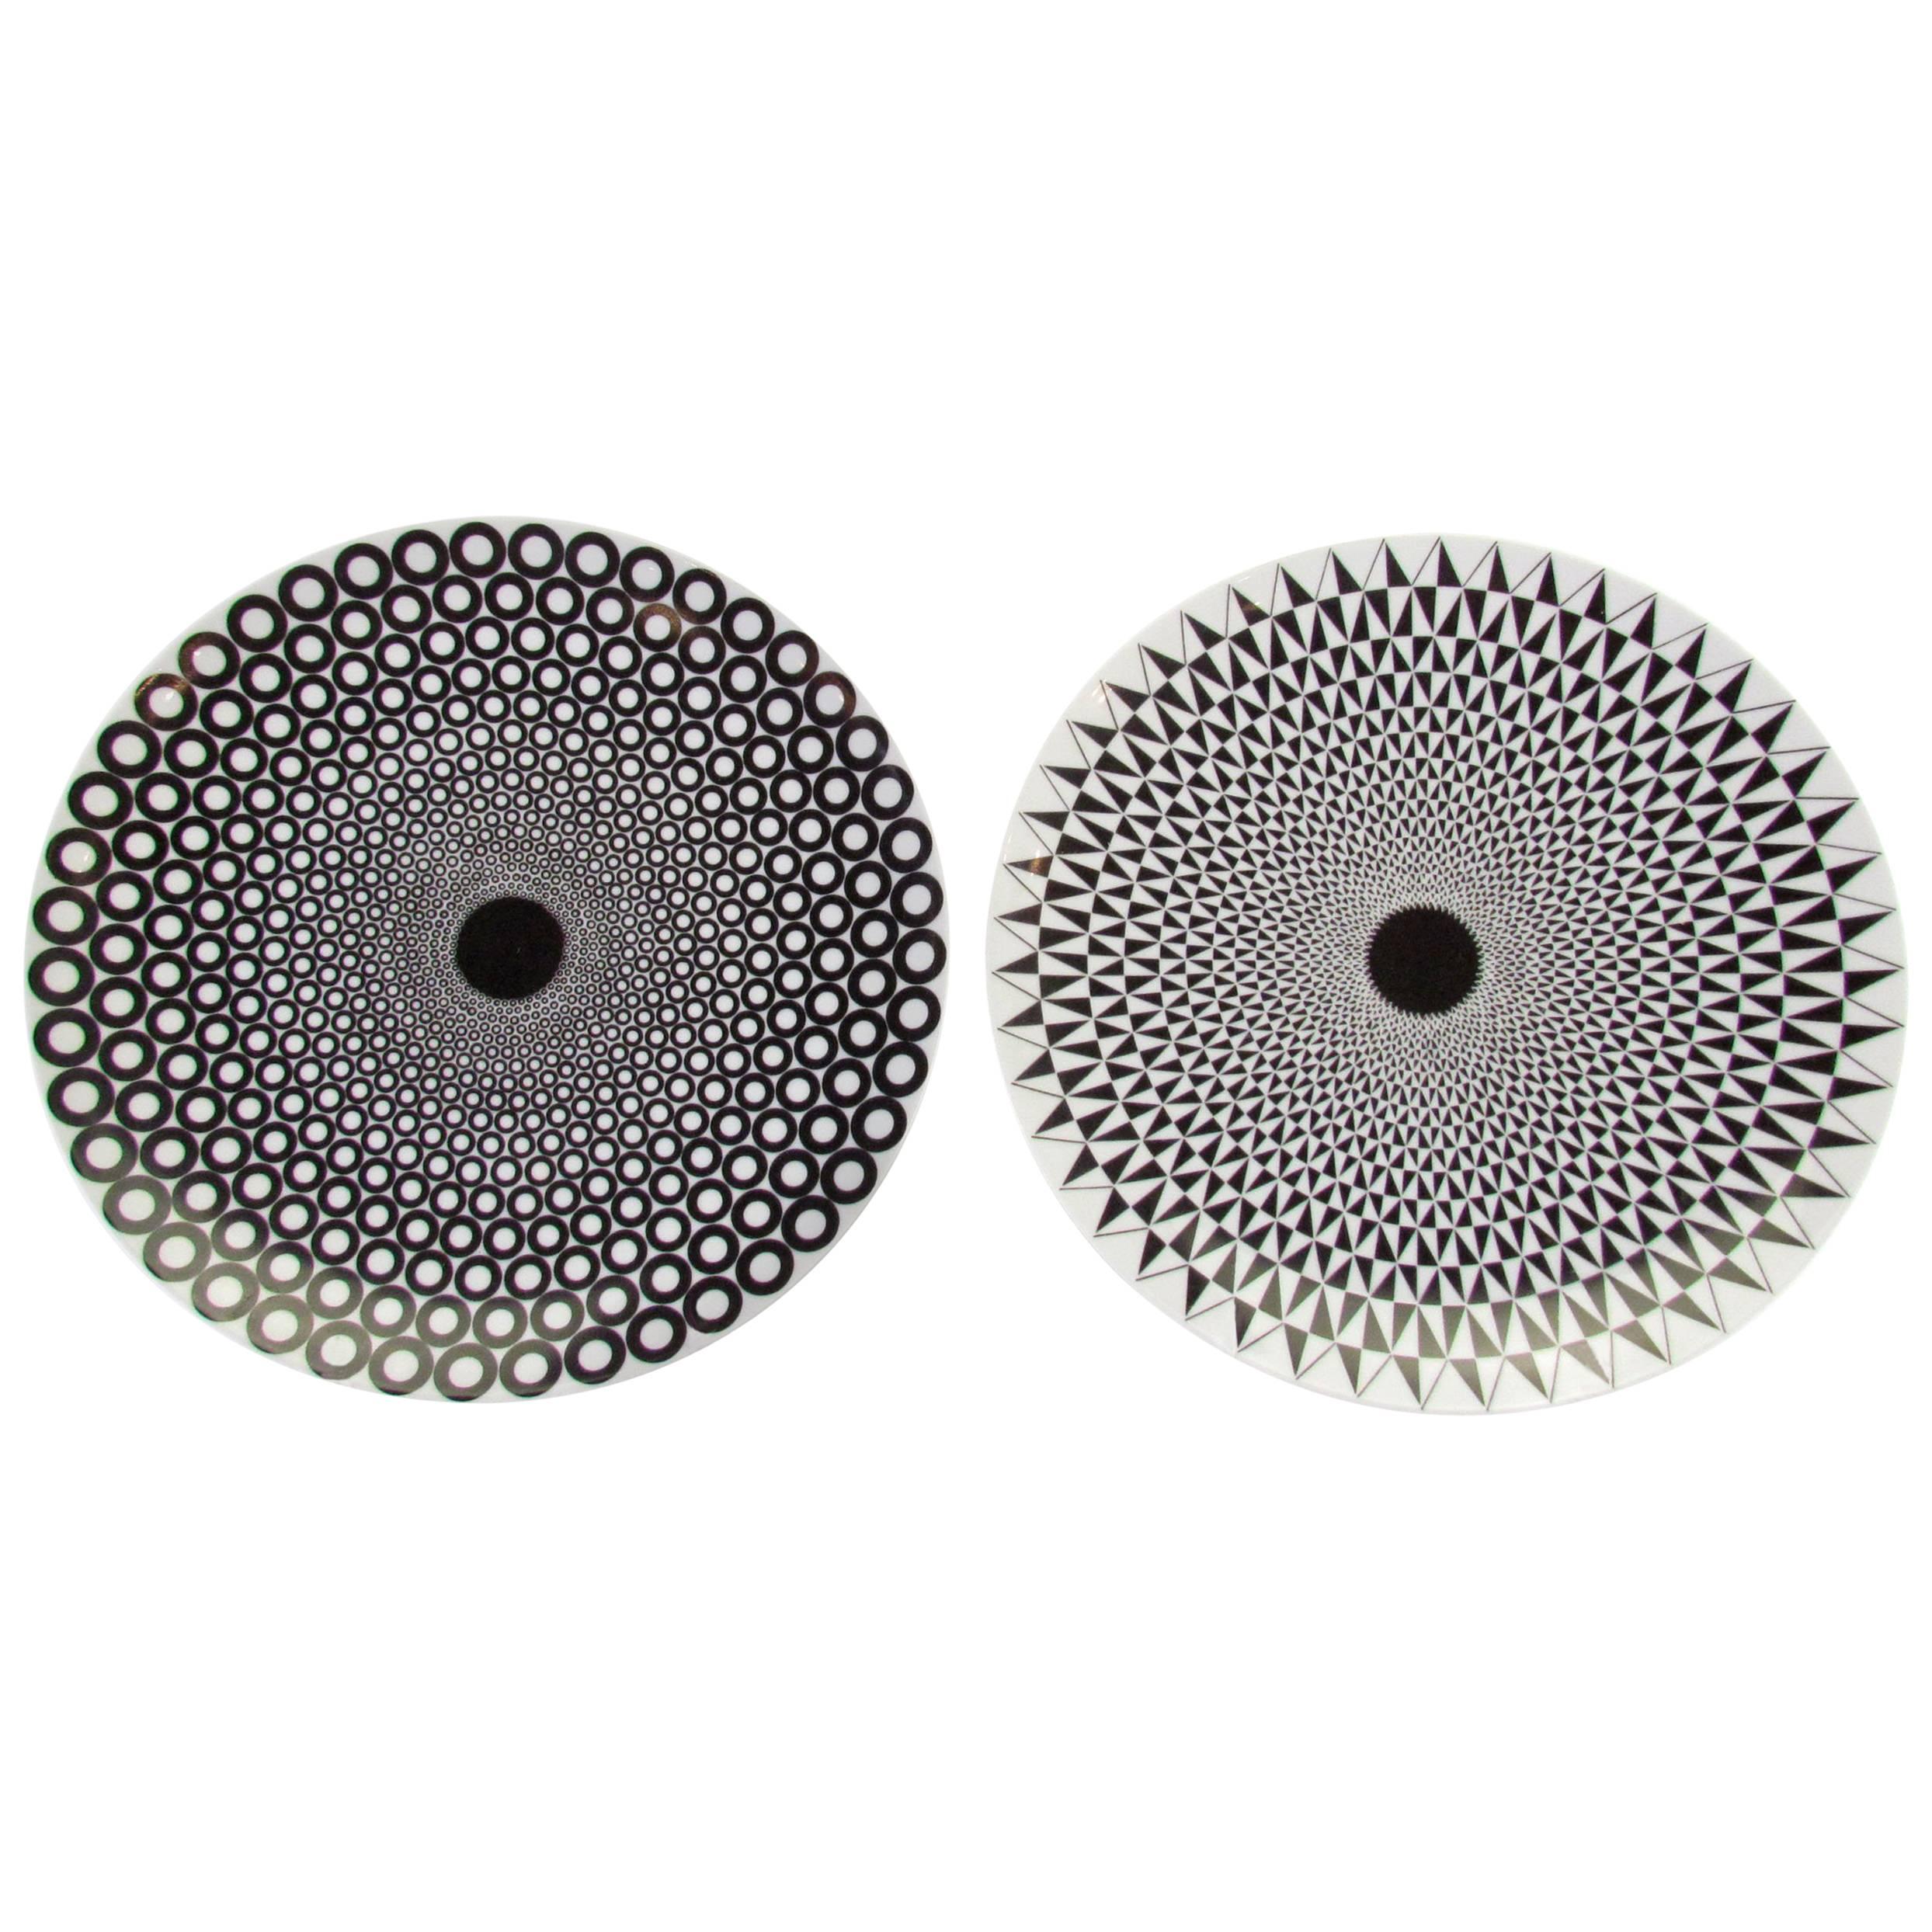 Two Piero Fornasetti Op Art Wall Plates, Egocentrismo Series